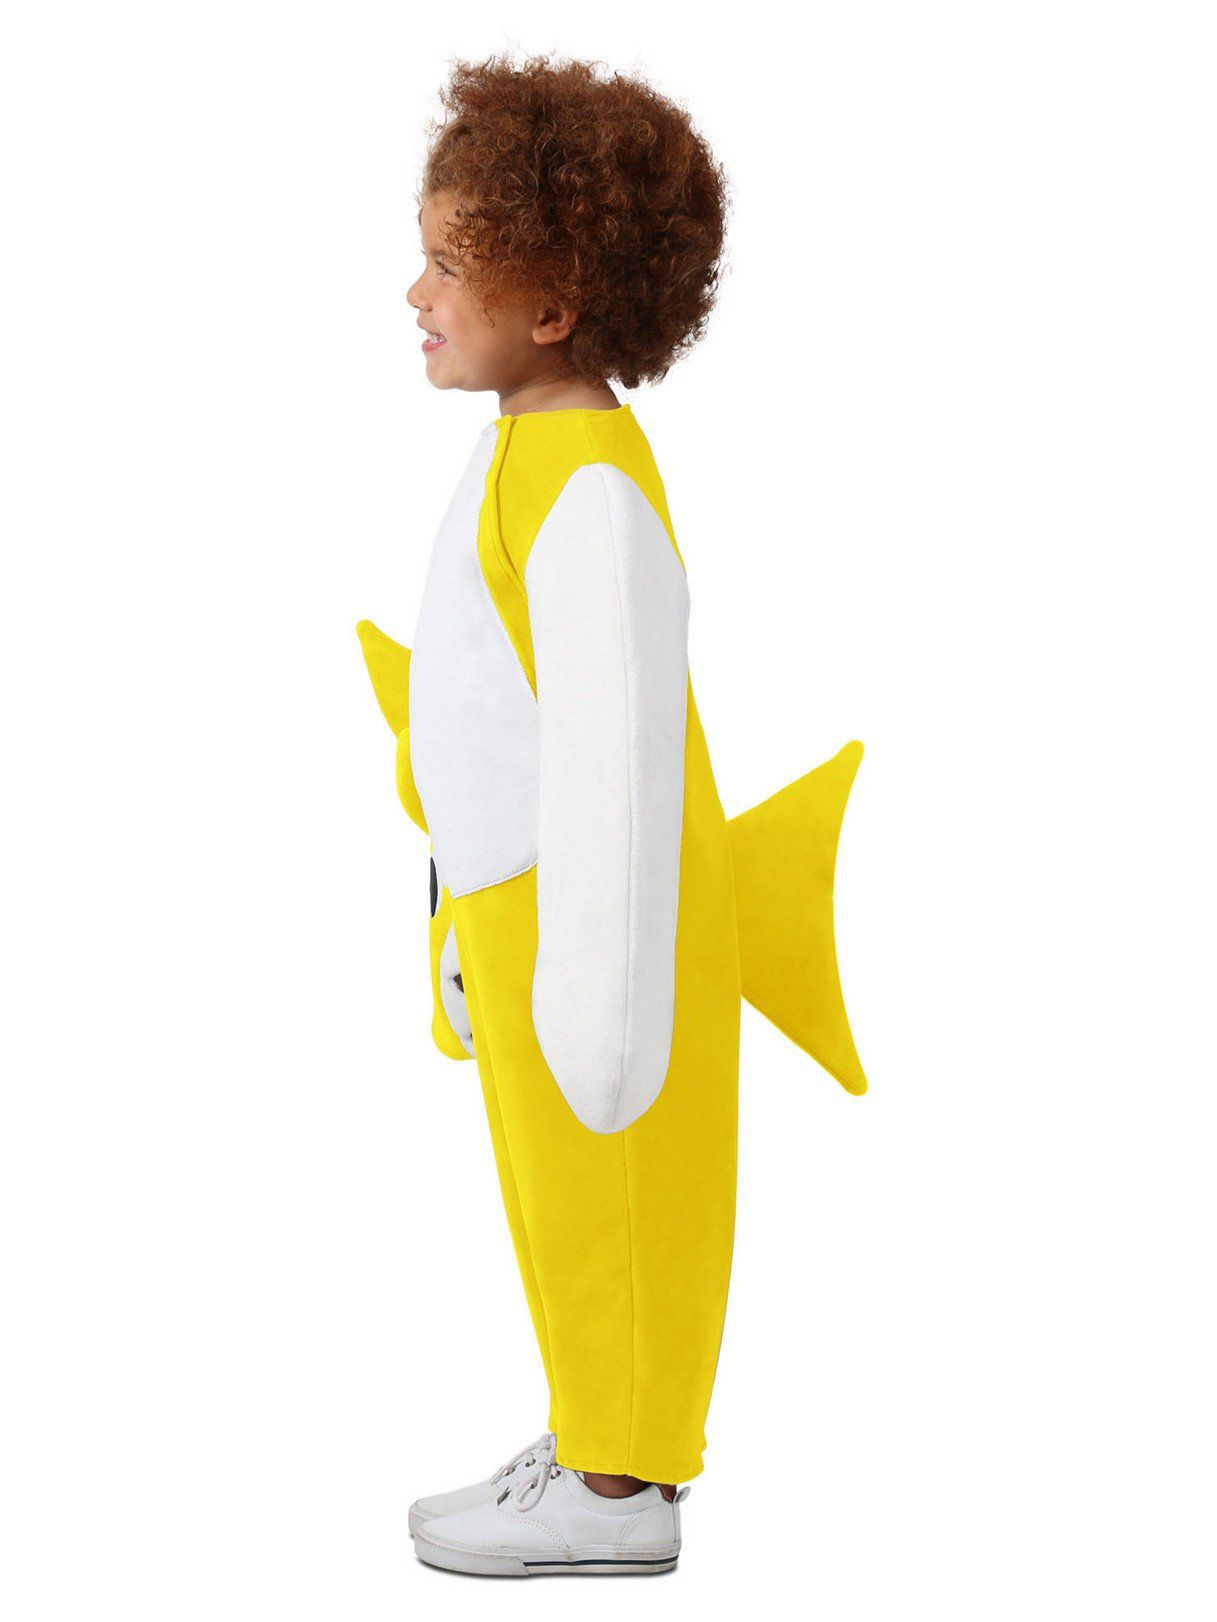 Kids' Baby Shark Chomper Costume with Sound - costumes.com